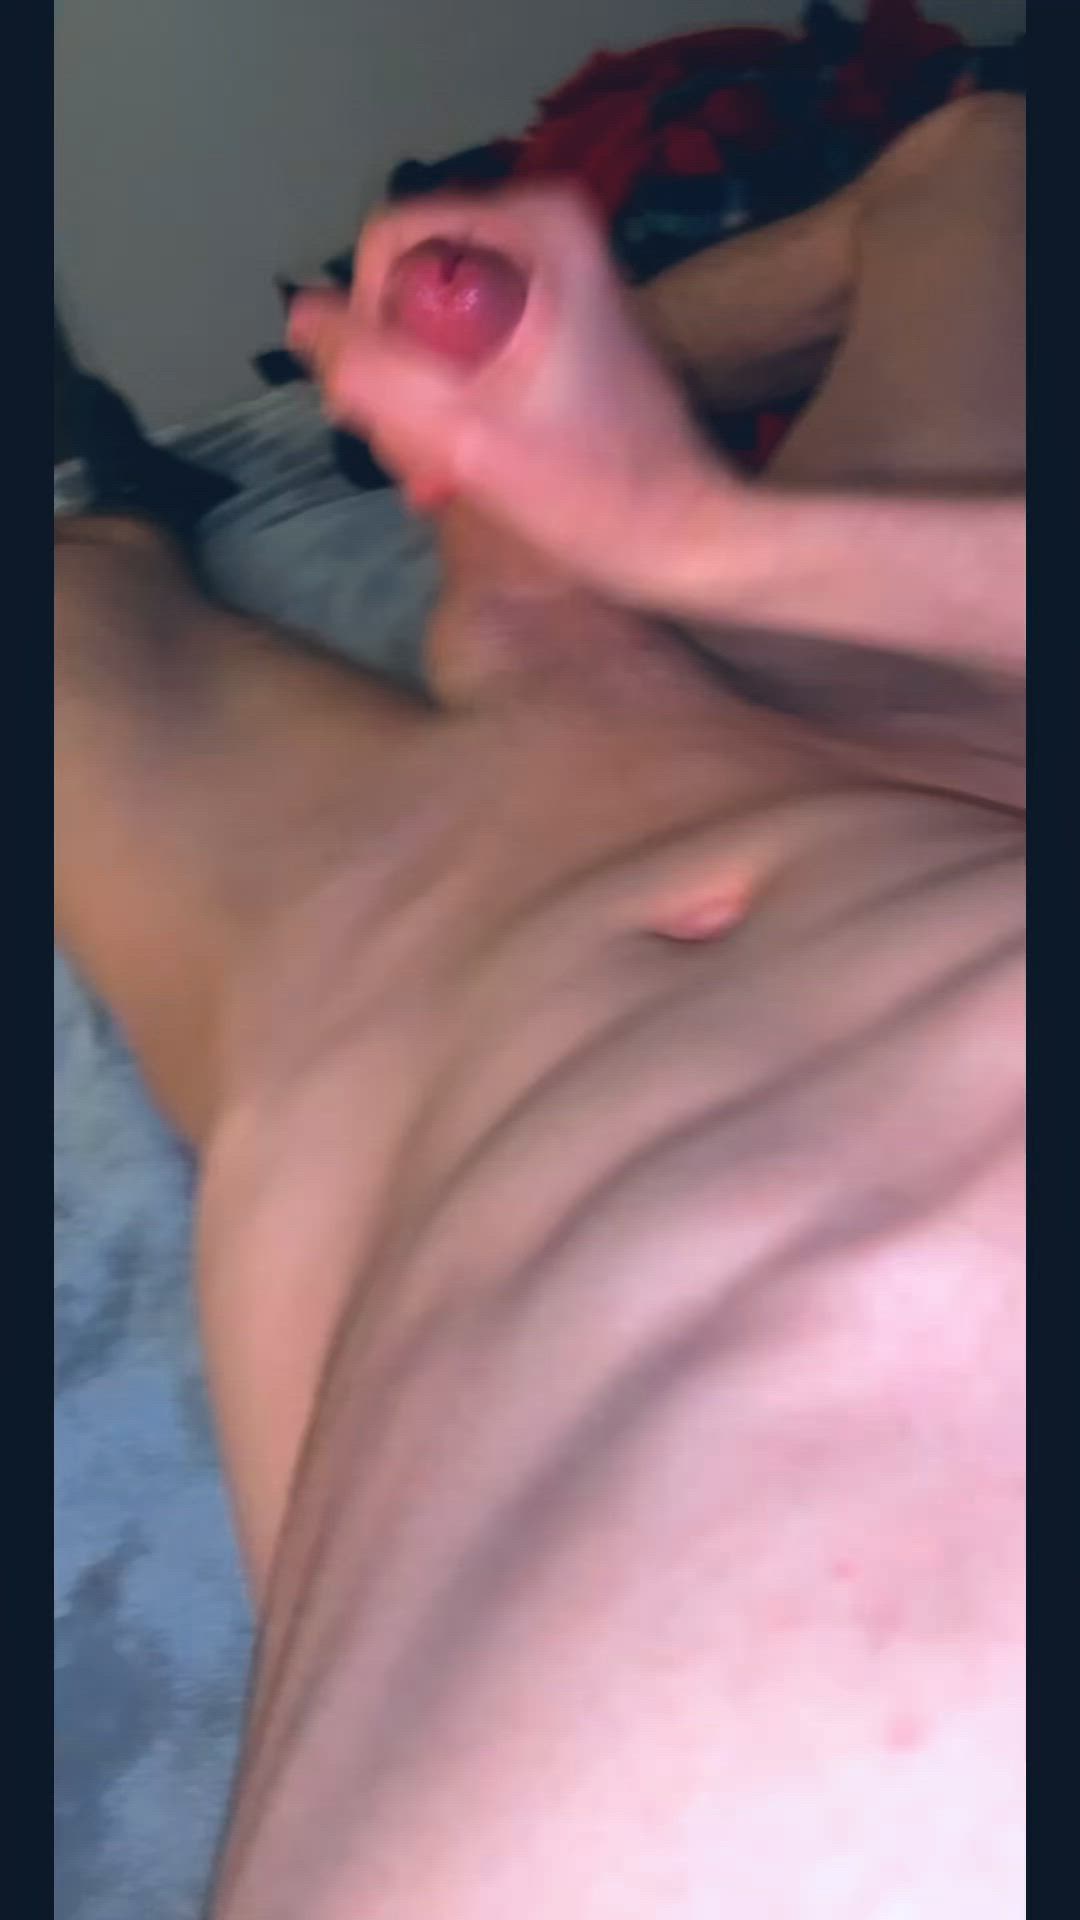 Amateur porn video with onlyfans model Luke <strong>@lukexxxwarm</strong>